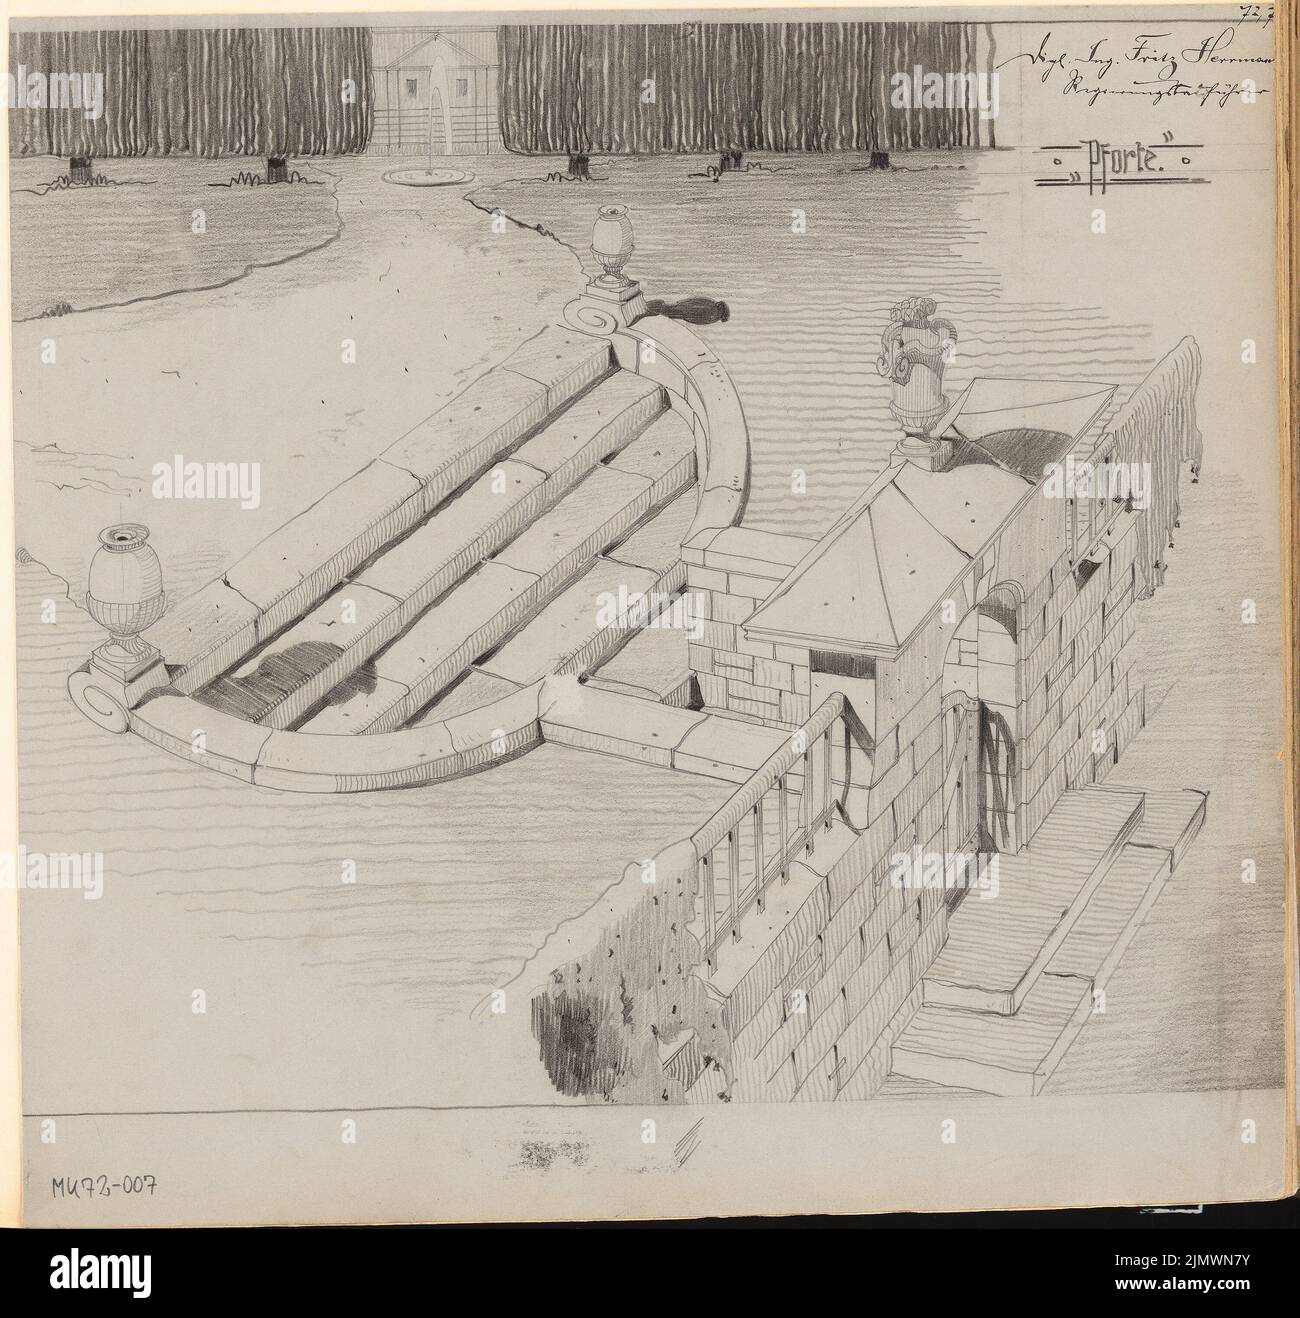 Hermann Fritz (1879-1914), garden entrance in feed wall. Monthly competition November 1907 (11.1907): Perspective view. Pencil on cardboard, 37.9 x 40.1 cm (including scan edges) Hermann Fritz  (1879-1914): Garteneingang in Futtermauer. Monatskonkurrenz November 1907 Stock Photo